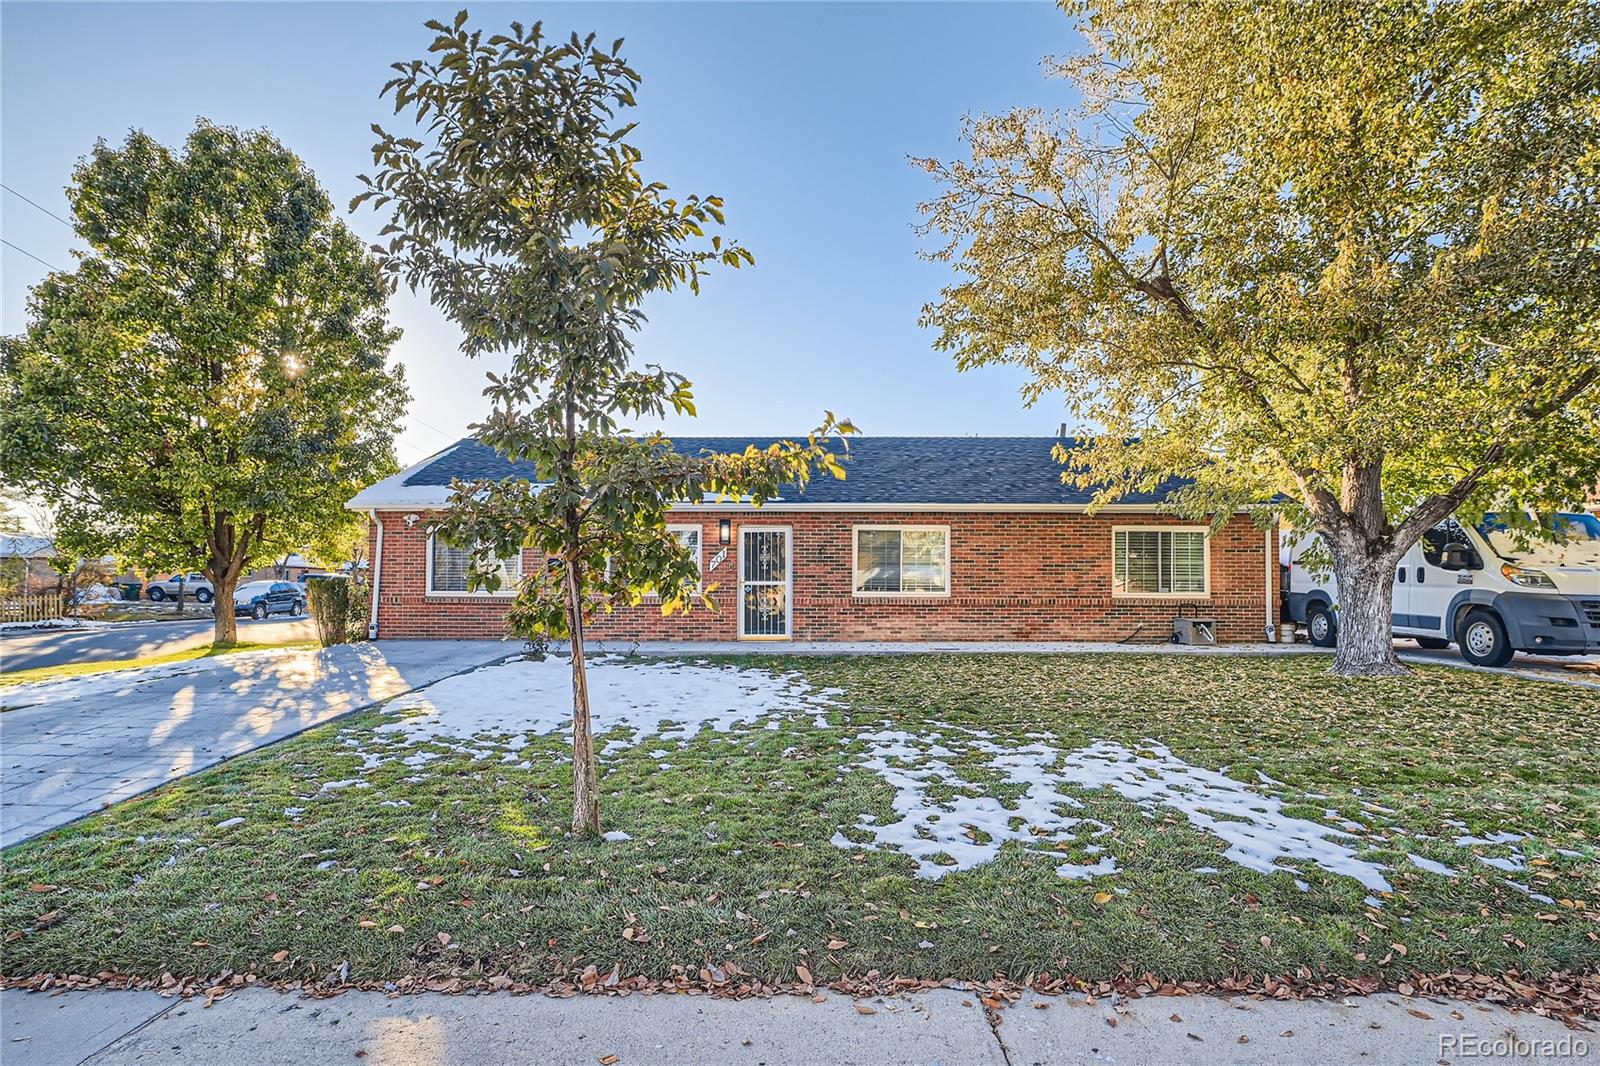 Report Image for 701 N Troy Court,Aurora, Colorado